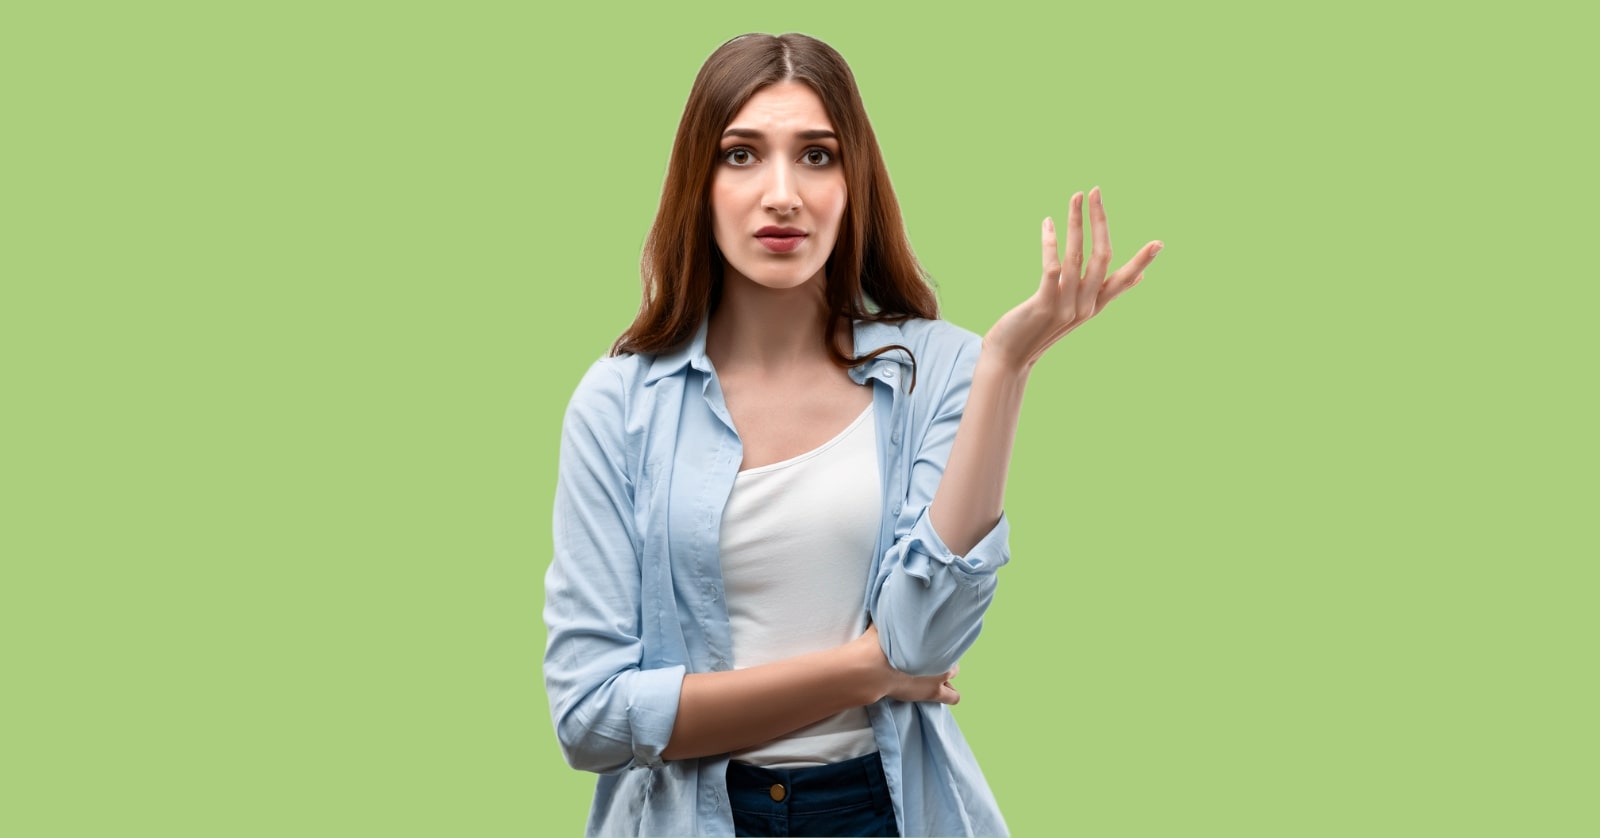 young brunette woman displaying petty body language with one hand slightly raised as if to say "so what?"